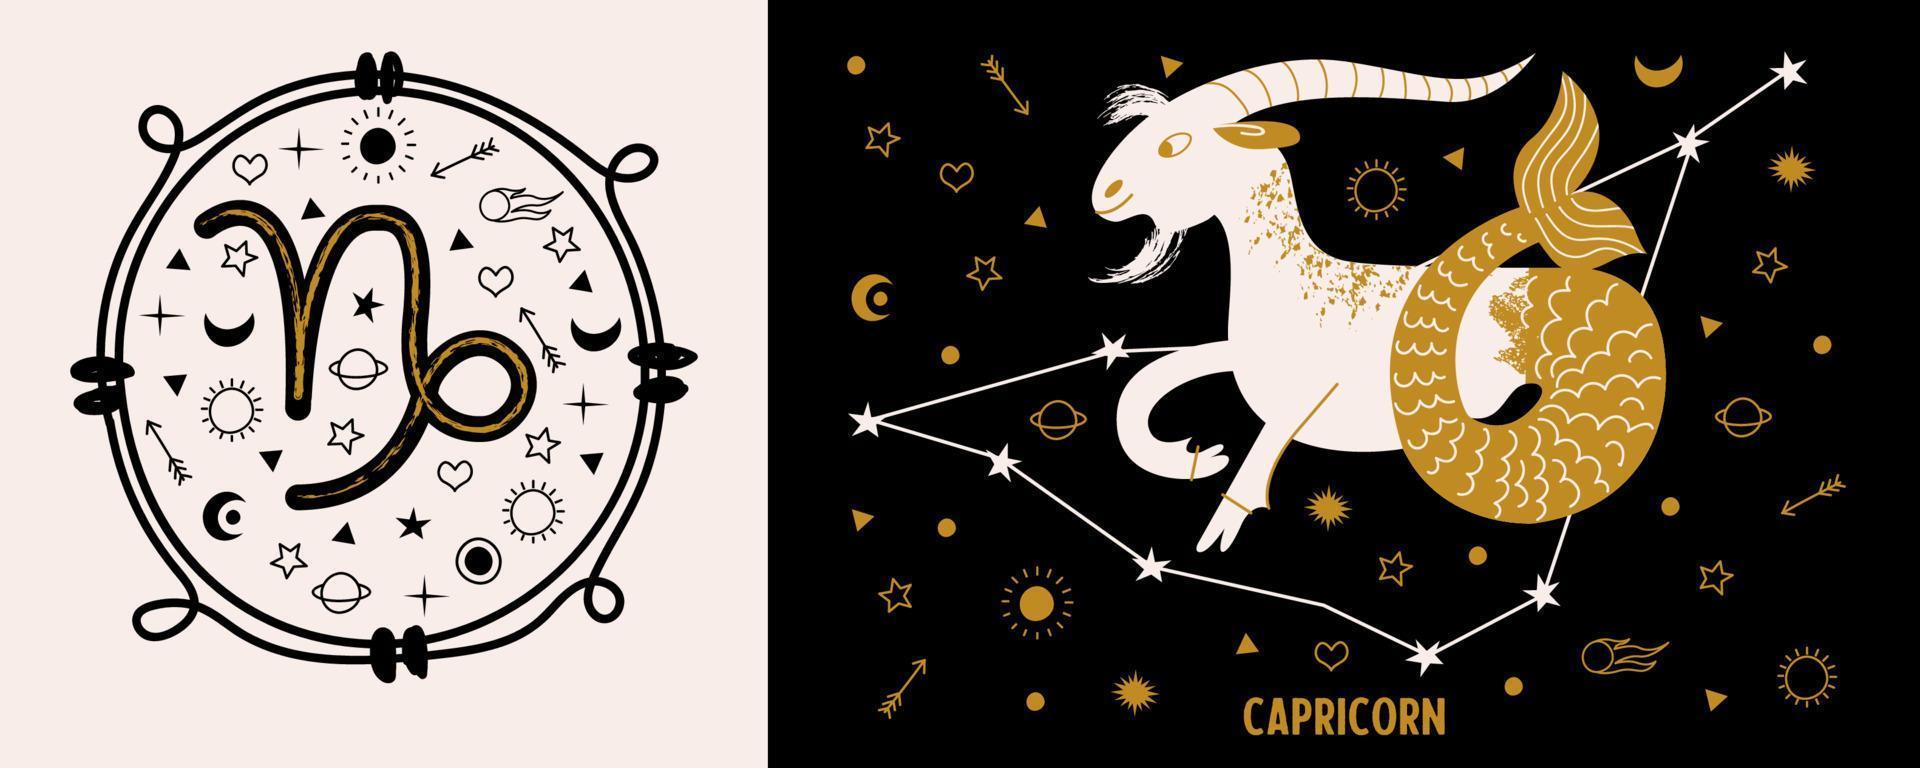 Capricorn is a sign of the zodiac. Horoscope and astrology. Vector ...